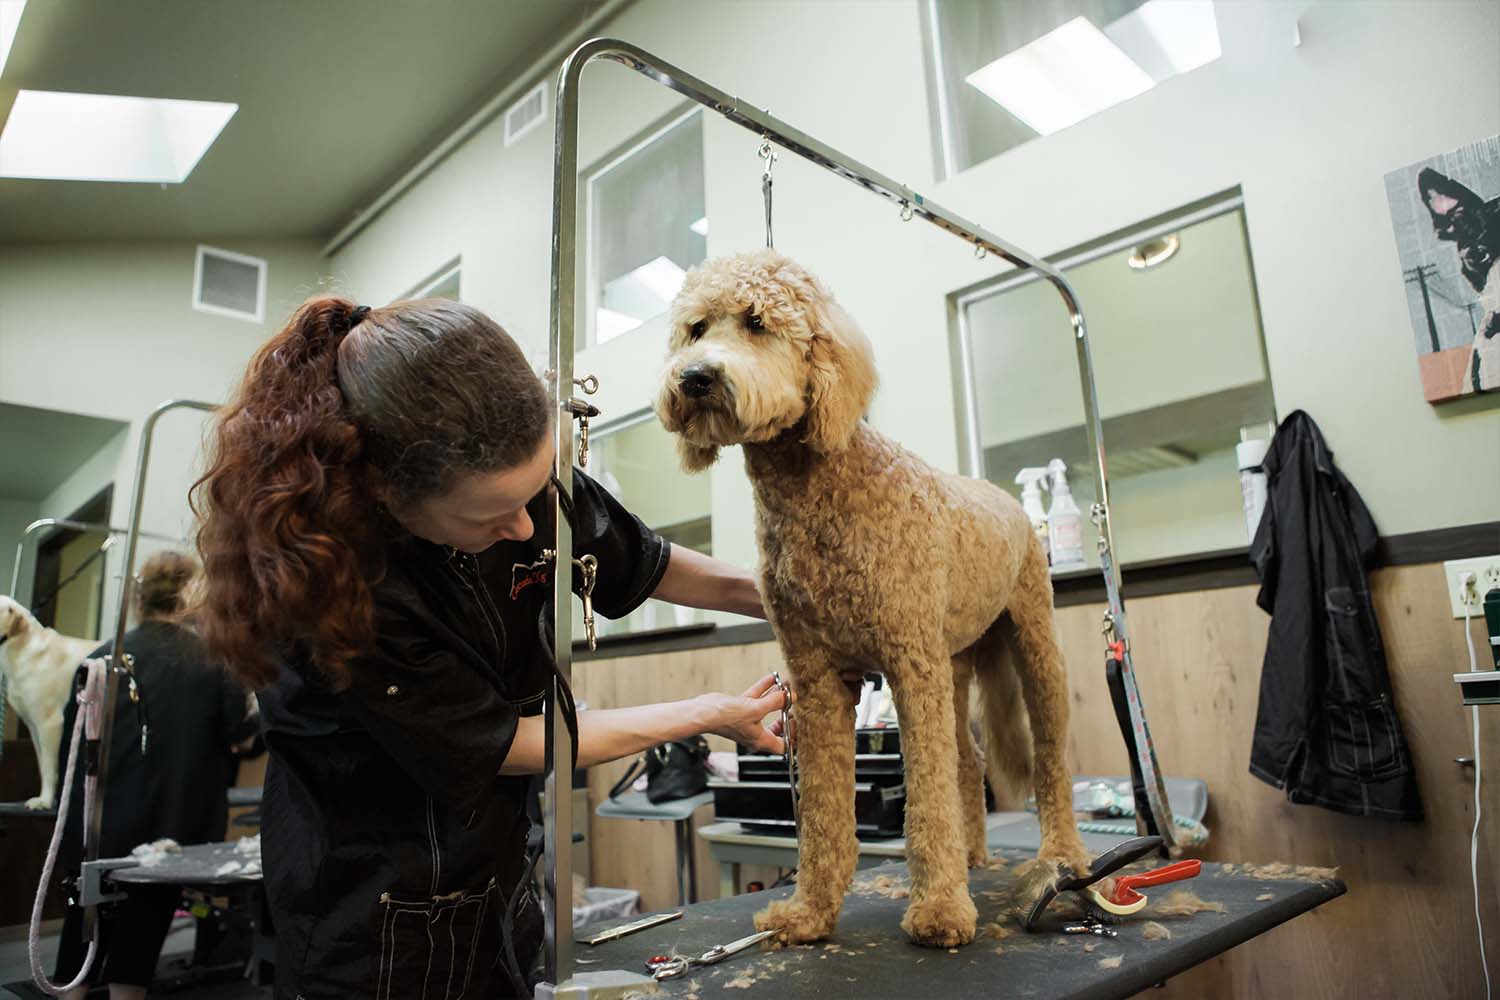 Most of the customers are satisfied with the services offered by the mobile dog groomers.